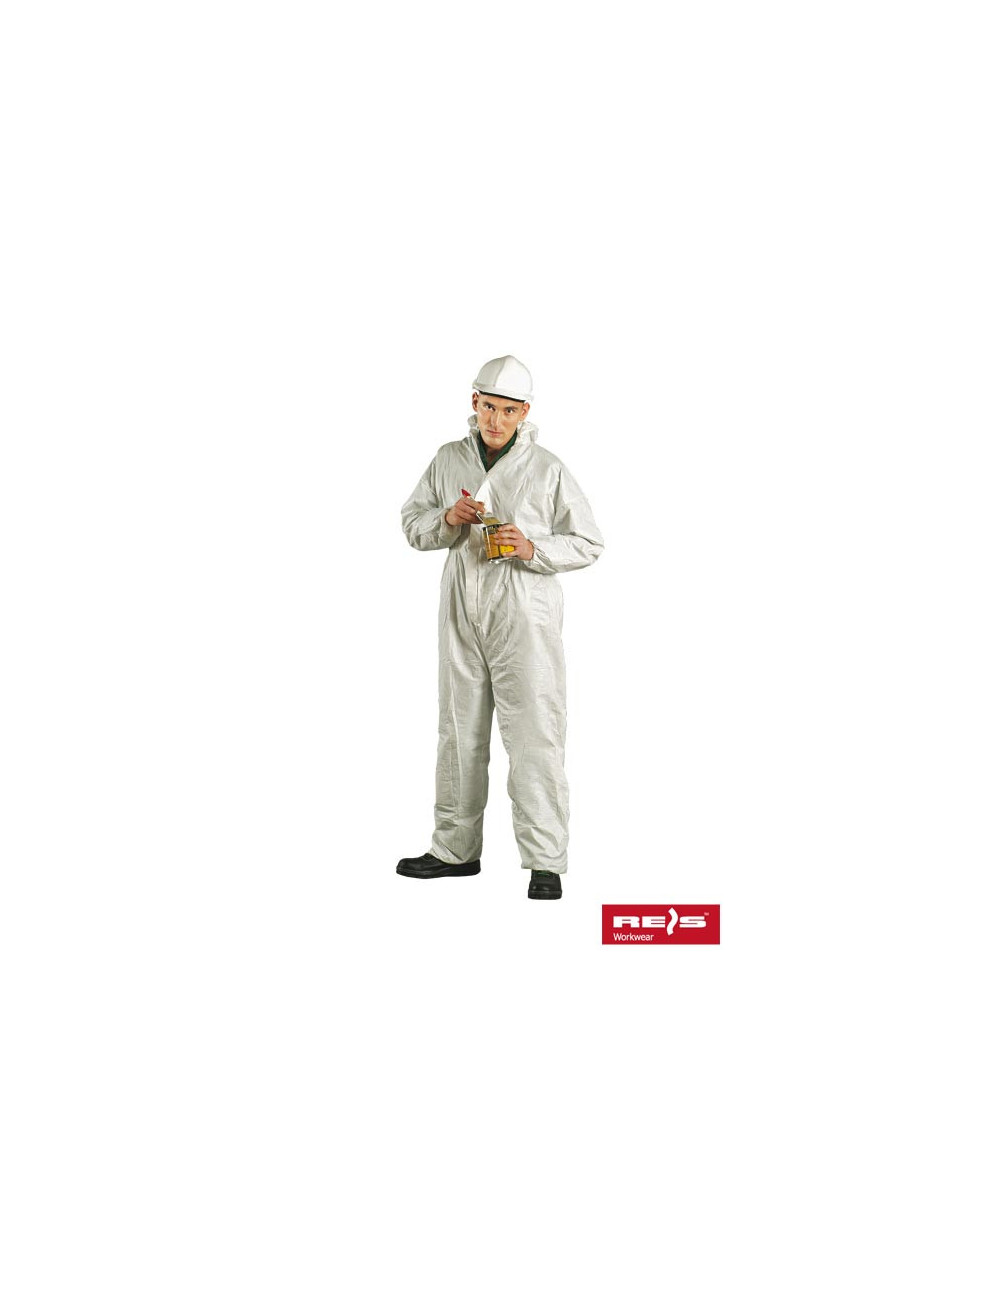 Lamicom protective suit in white Reis